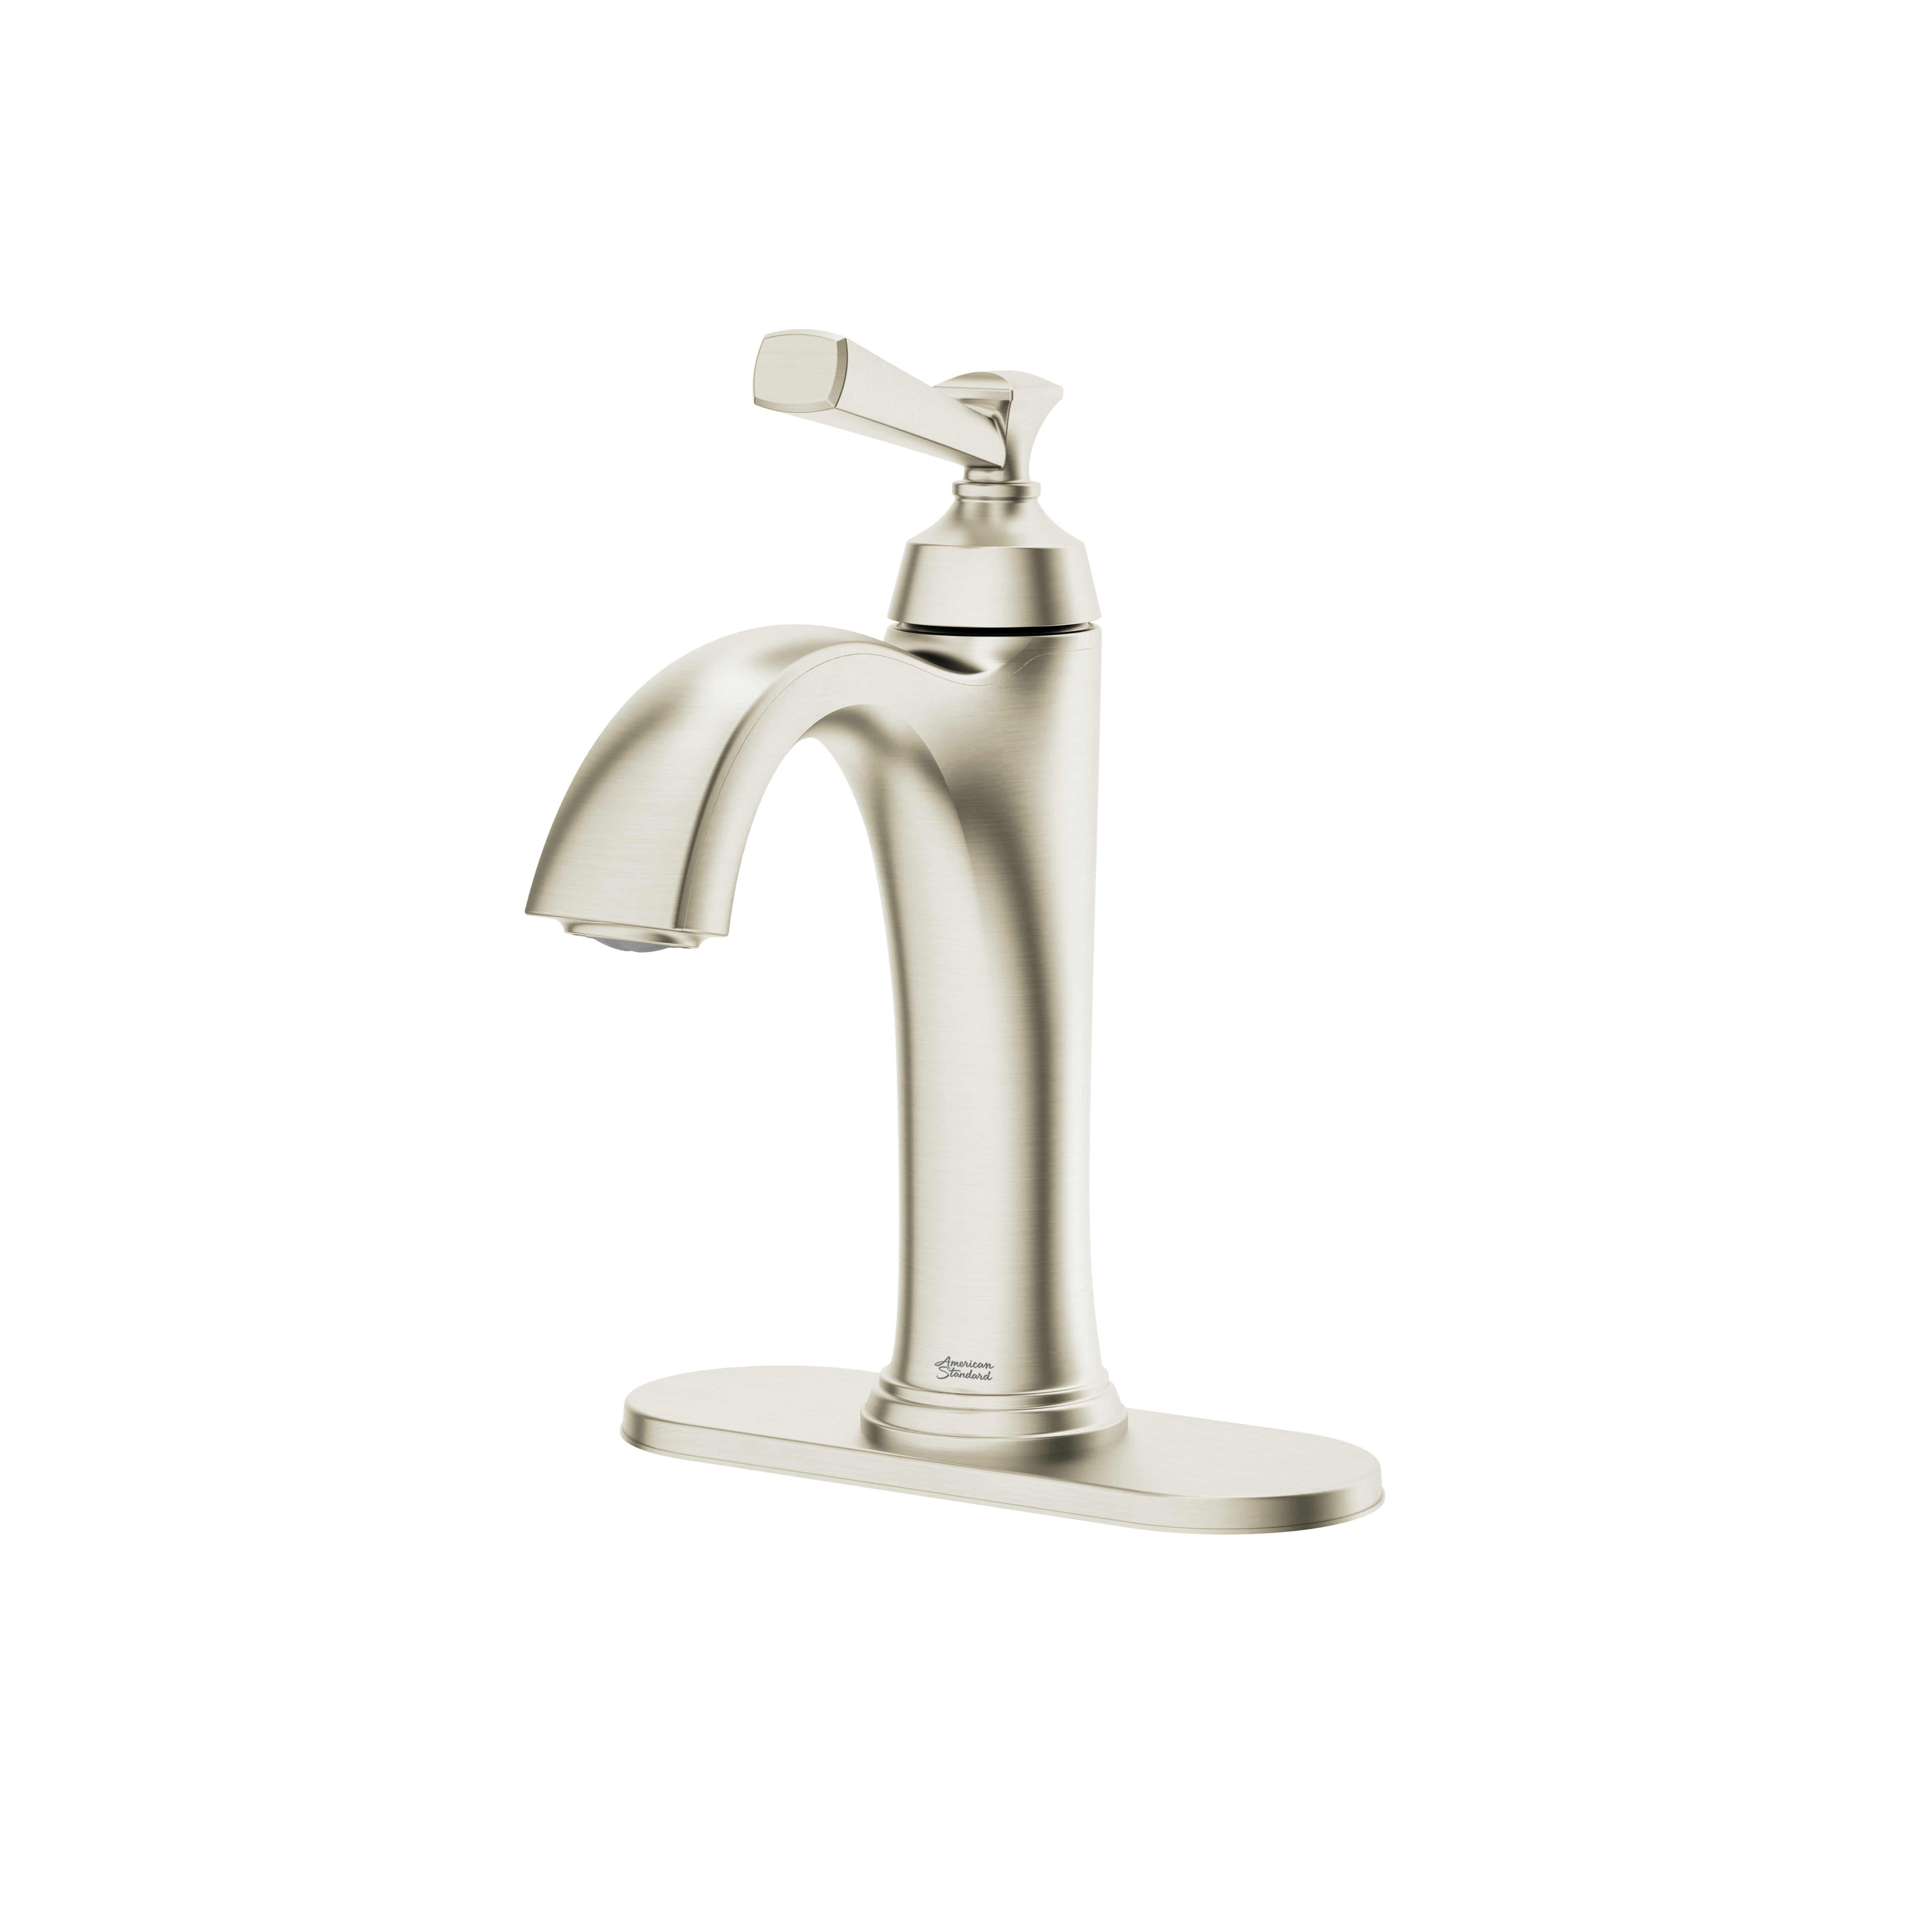 Rumson Single Hole Single Handle Bathroom Faucet 12 GPM with Lever Handle   BRUSHED NICKEL